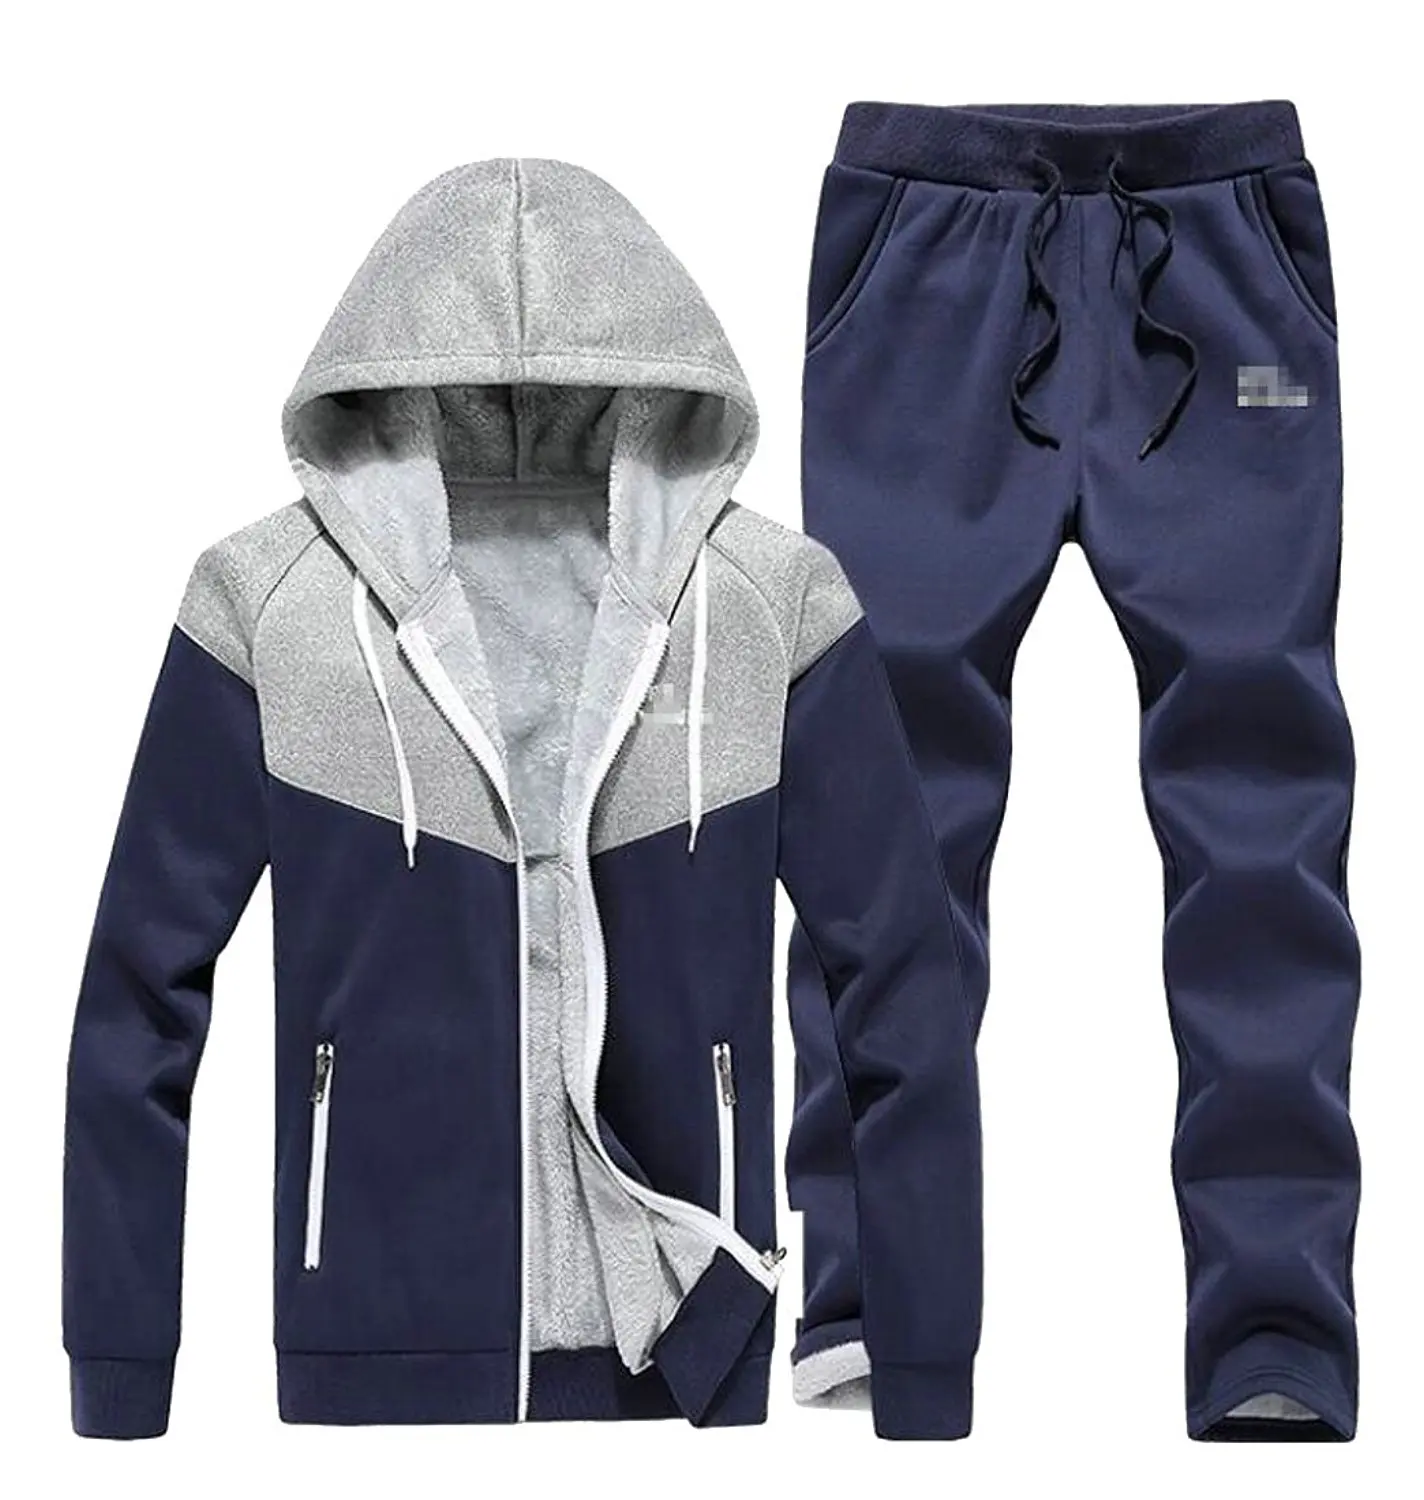 Cheap Cute Sweat Suits, find Cute Sweat Suits deals on line at Alibaba.com